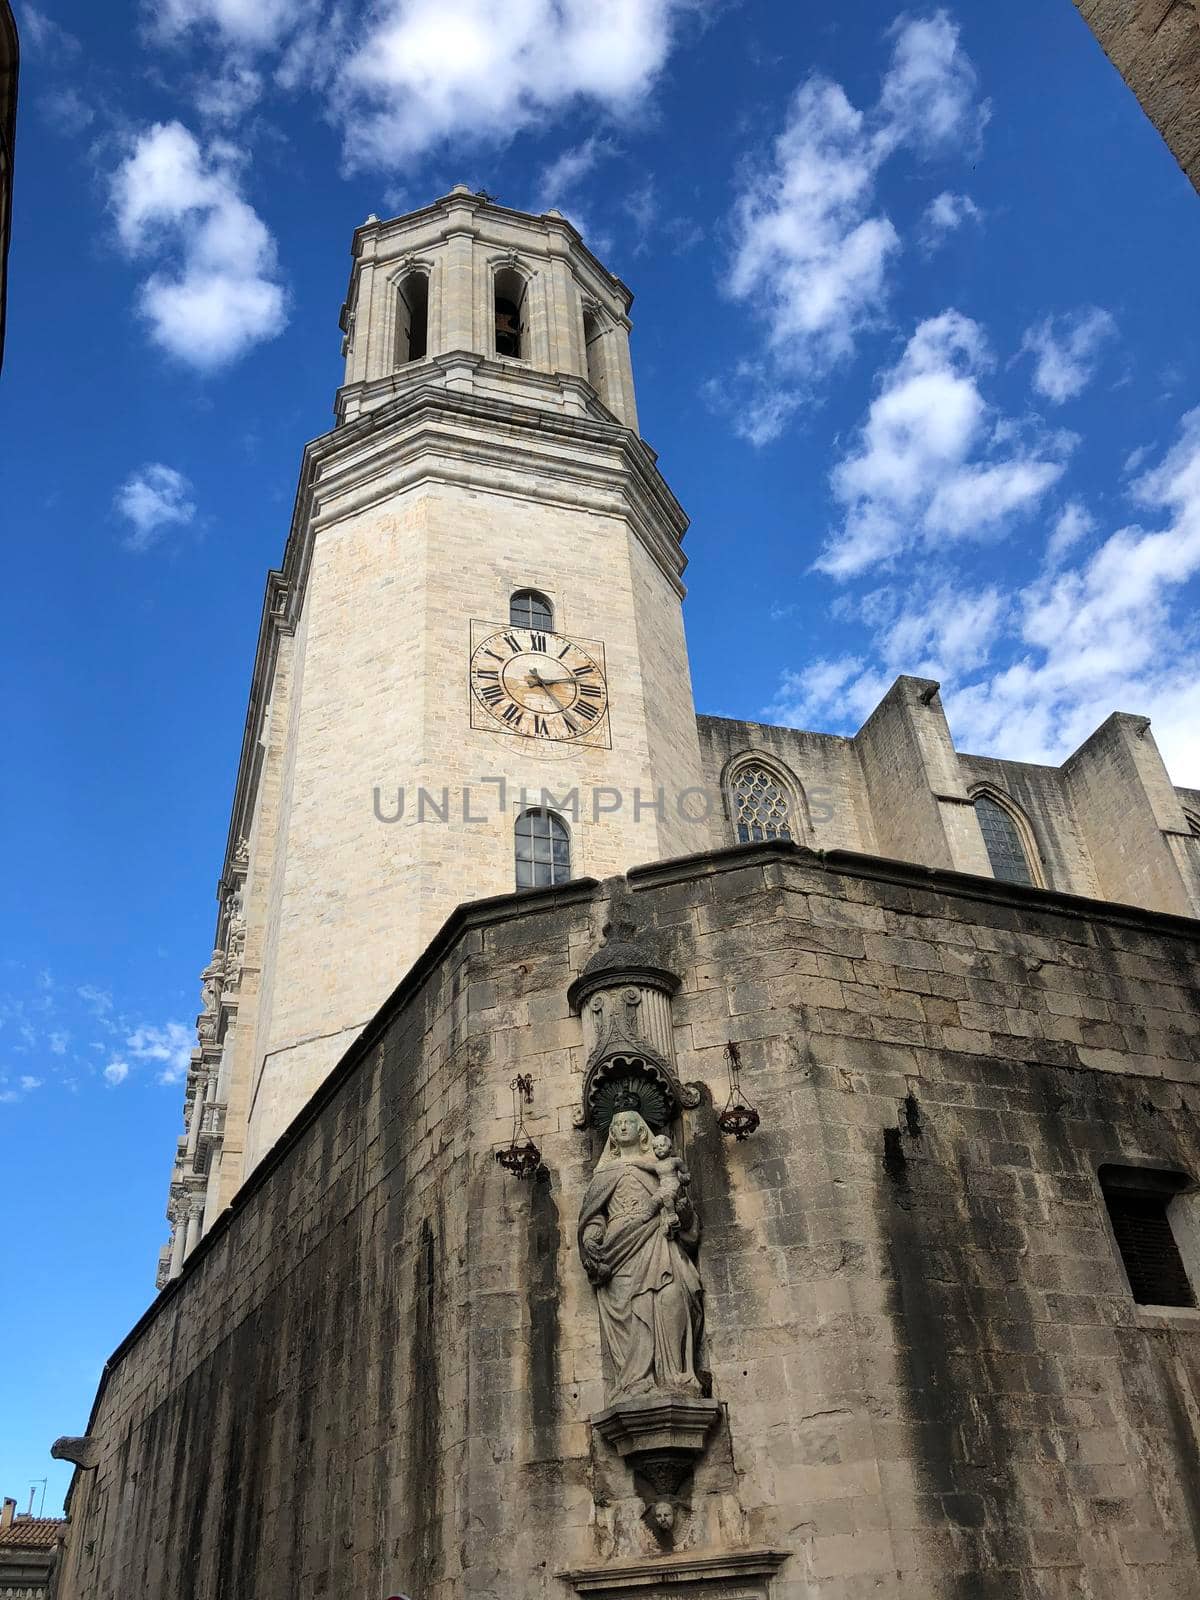 Cathedral of Girona in Catalonia, Spain